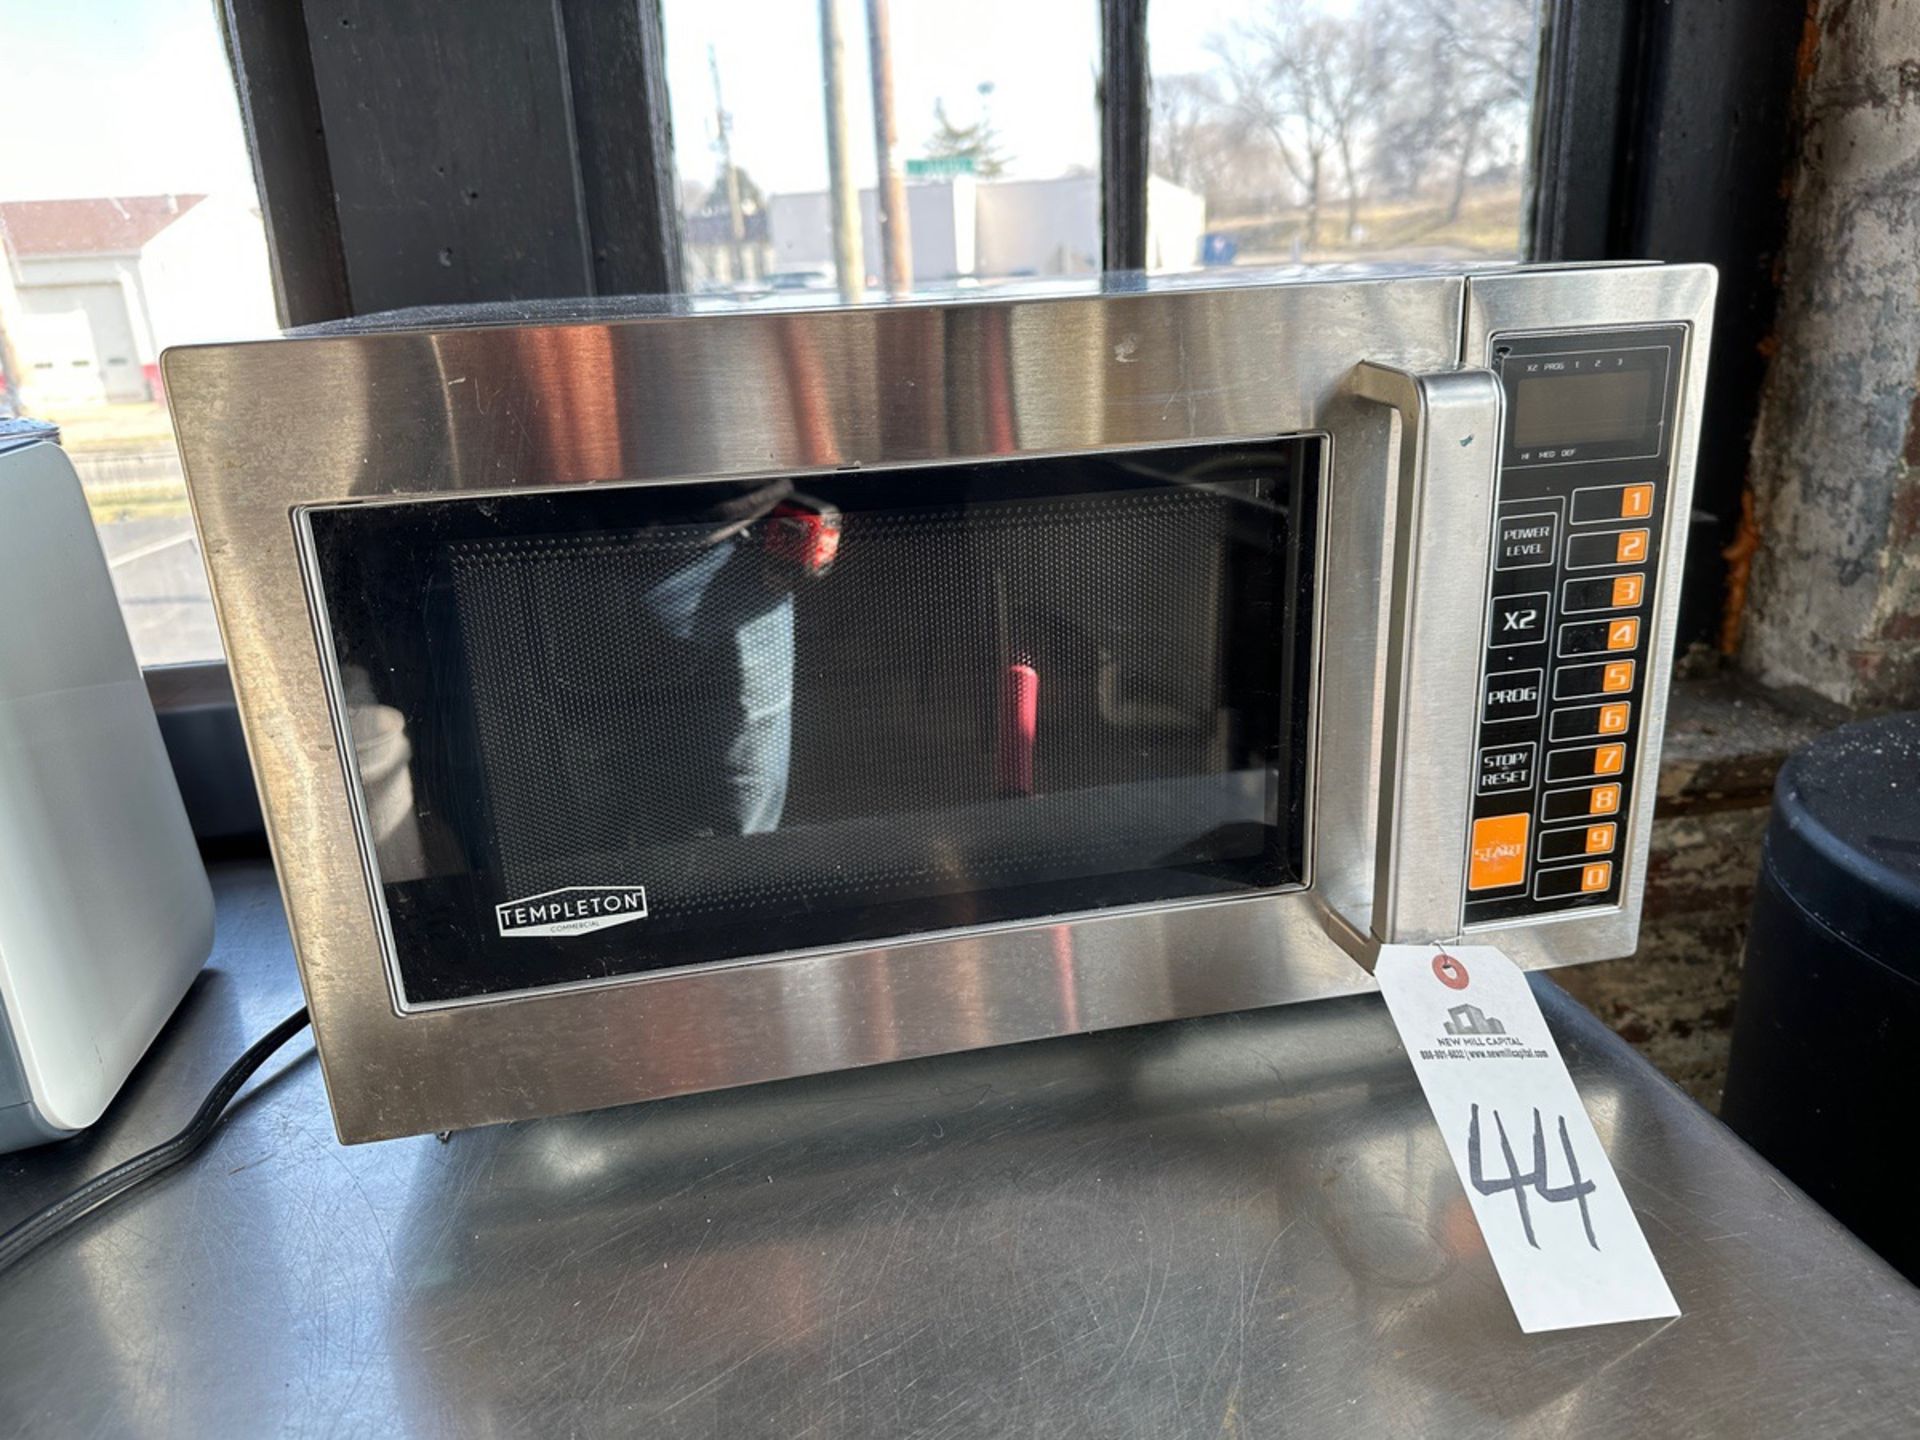 Templeton 1000W Commercial Microwave Oven, Model AFA-GMW-002 | Rig Fee $20